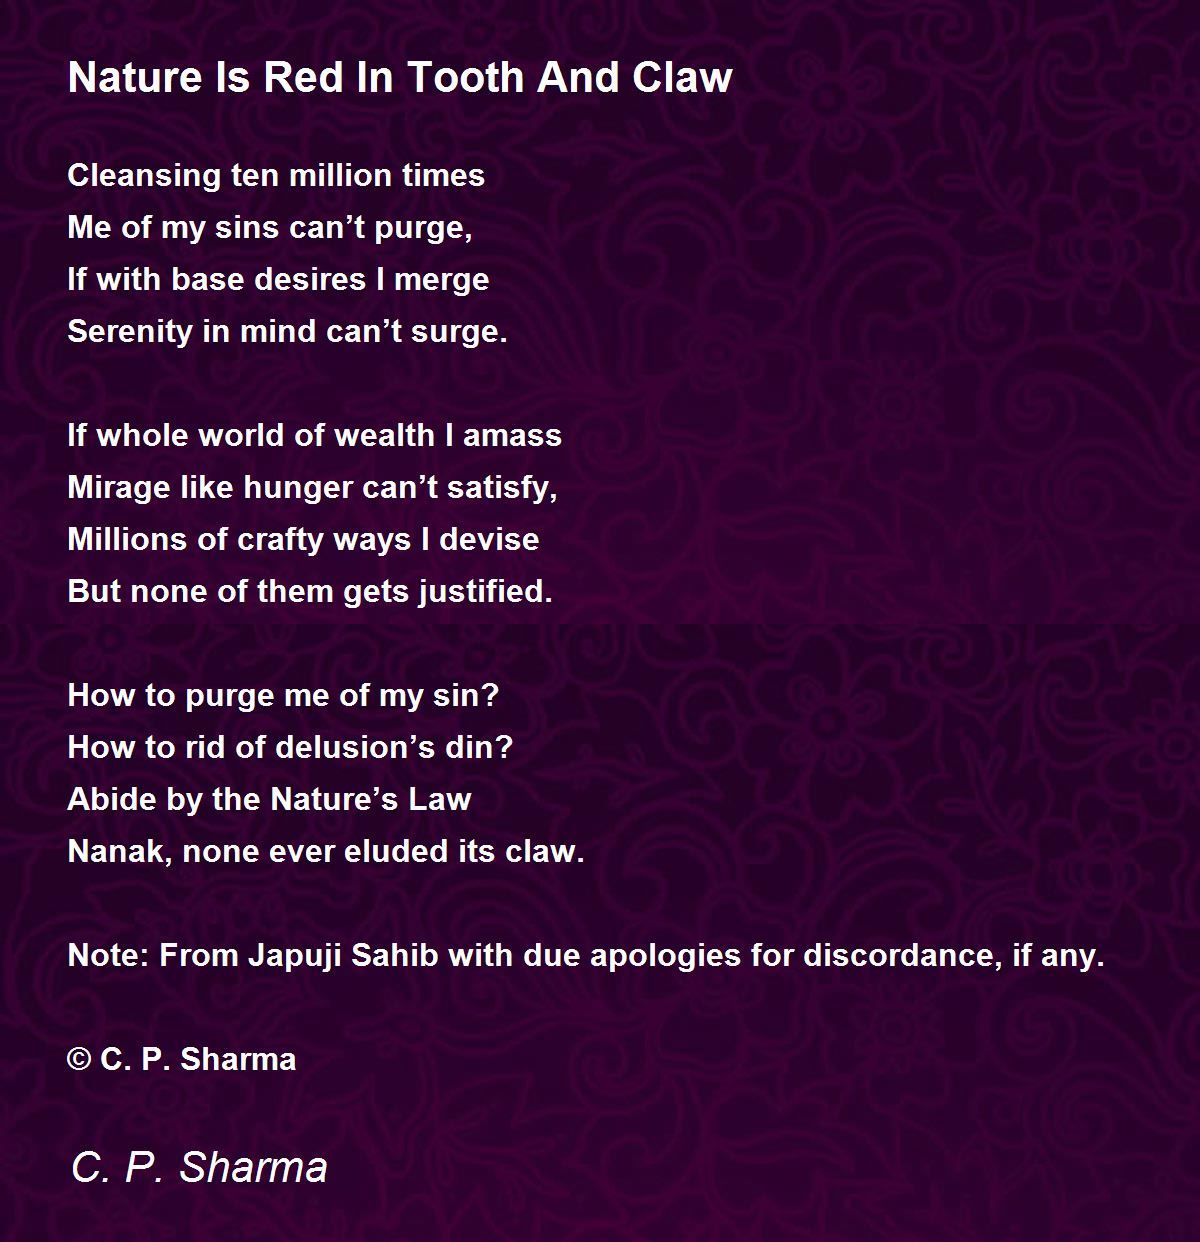 Nature Red Tooth And Claw by C. P. Sharma - Nature Is In Tooth And Claw Poem